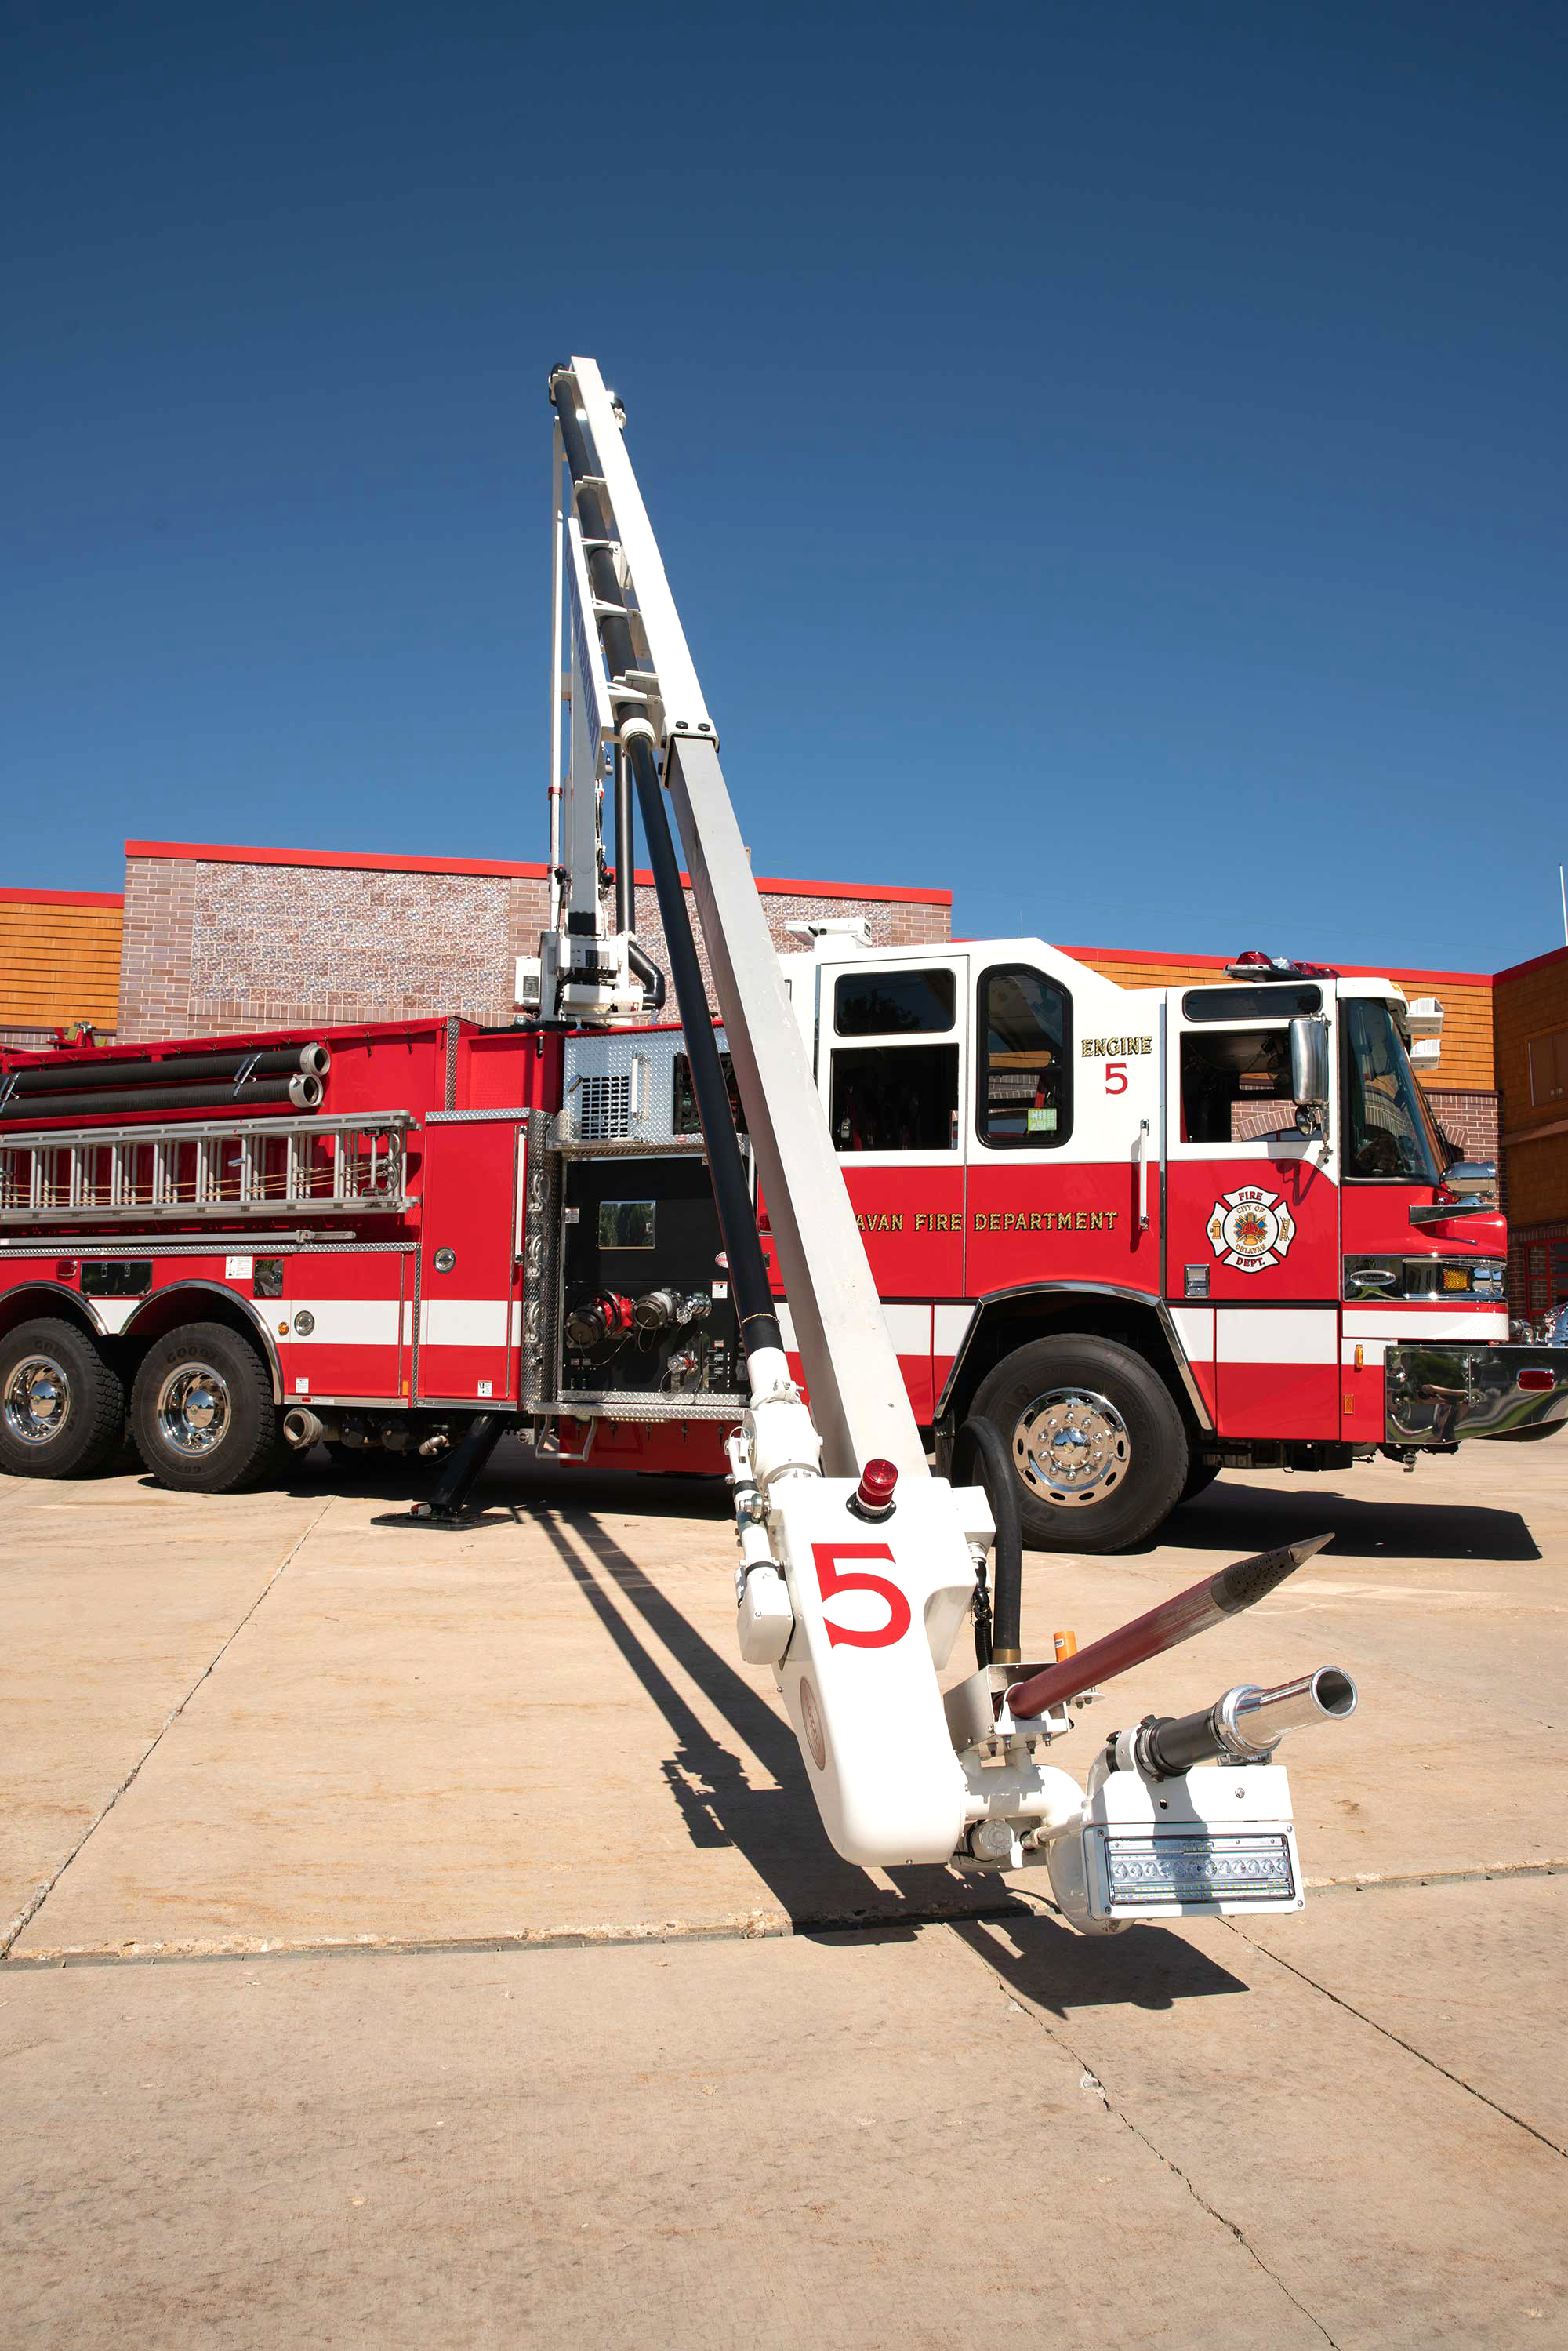 A Pierce Fire Truck outside on a sunny day in front of a Fire Station with a 36-inch Piercing Depth Snozzle. 